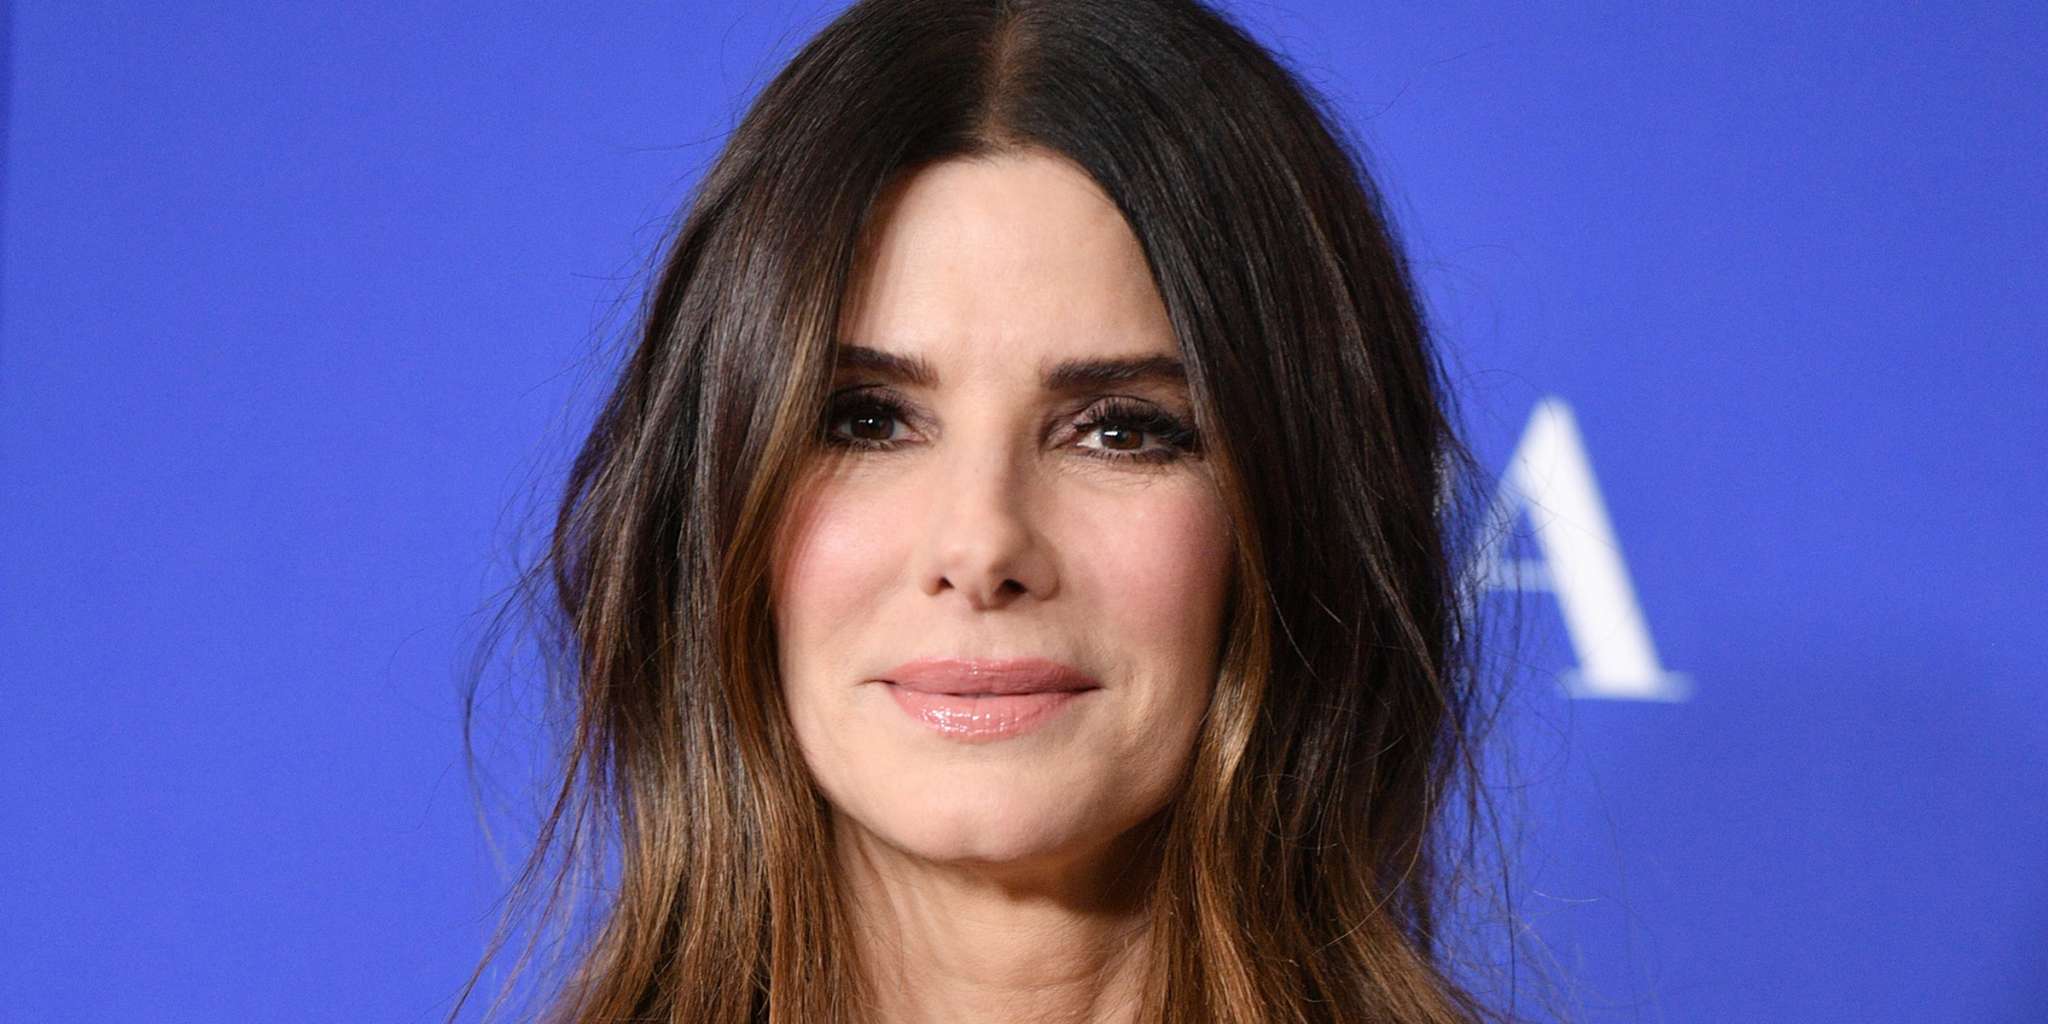 ”sandra-bullock-is-stepping-away-from-acting”